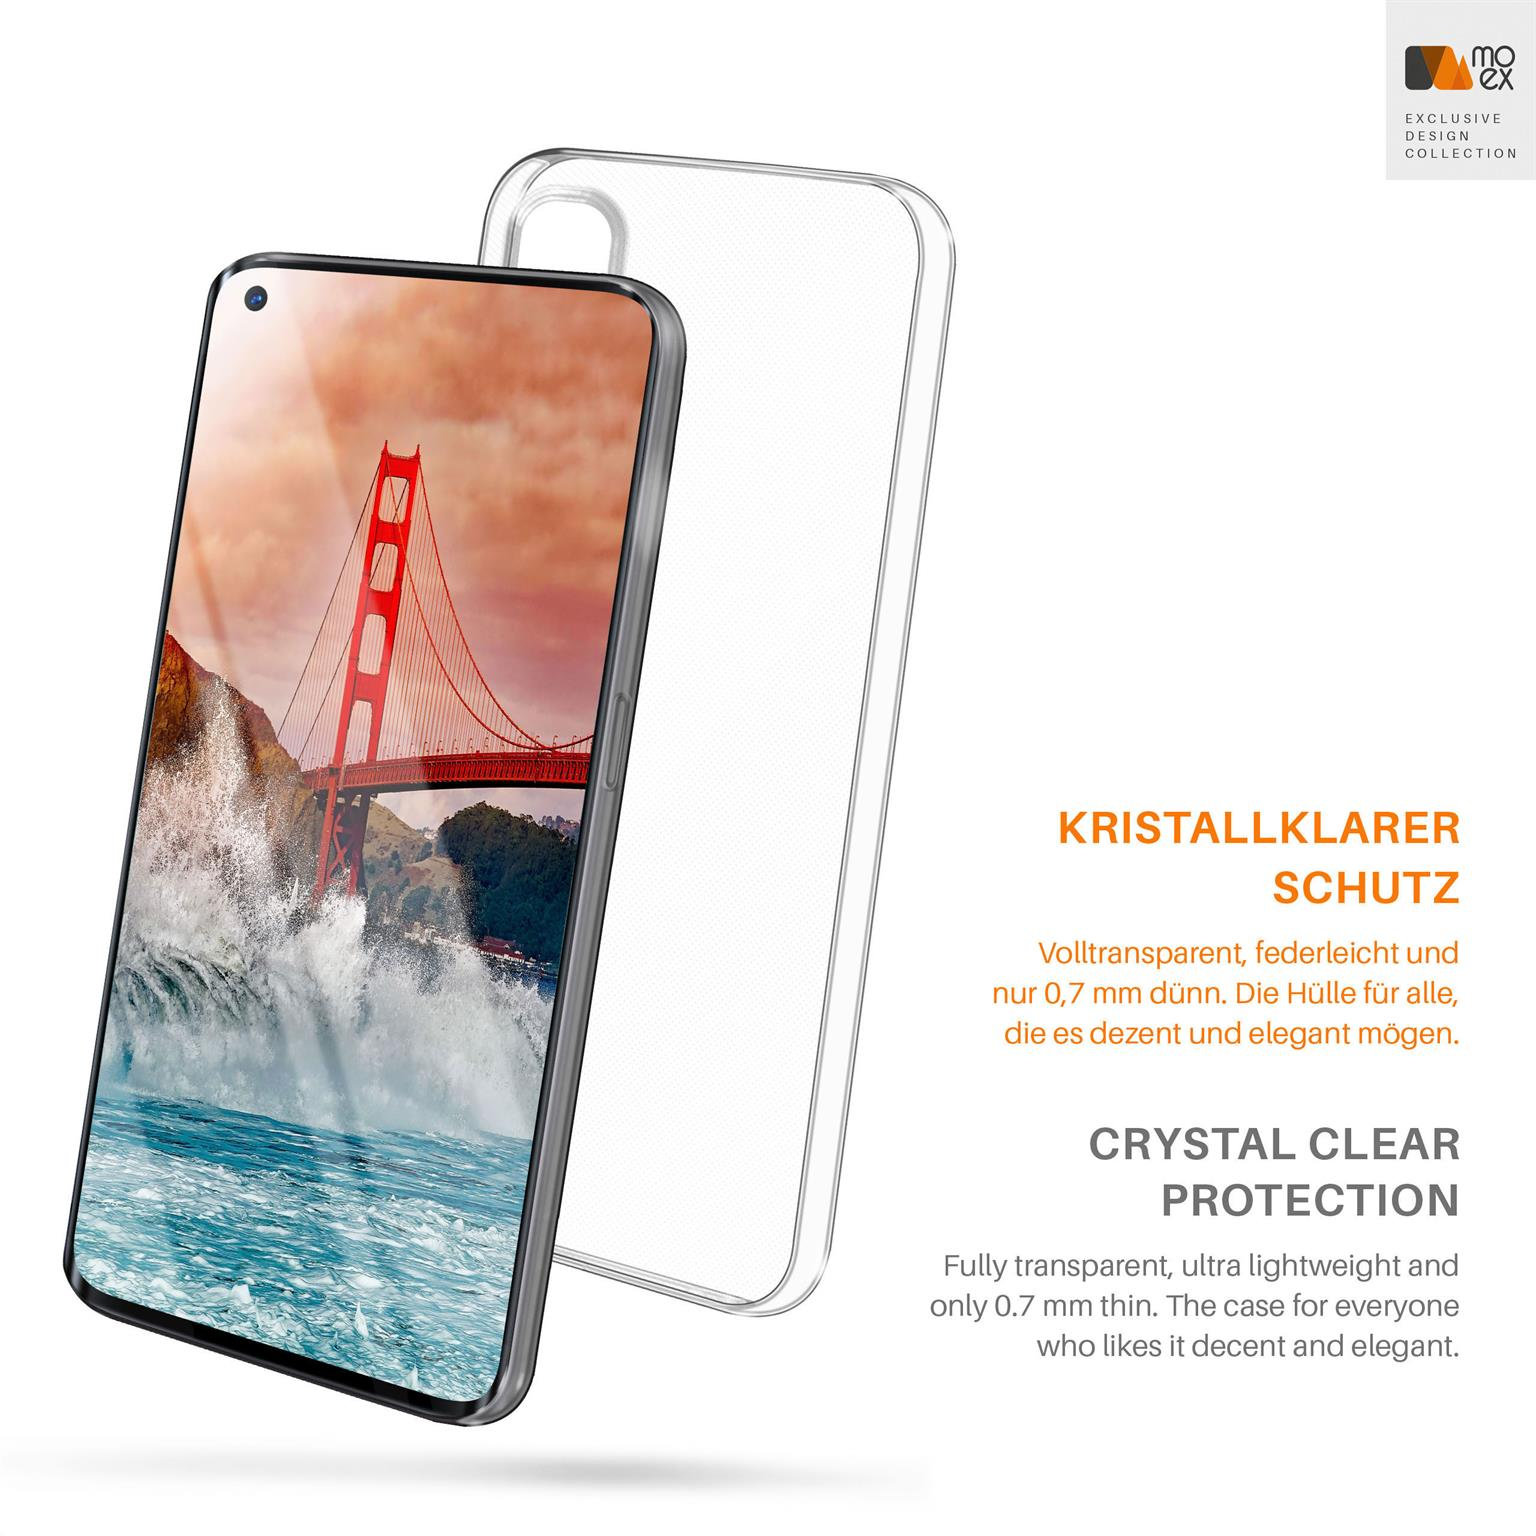 MOEX Aero Backcover, Crystal-Clear Find Neo, X2 Case, Oppo